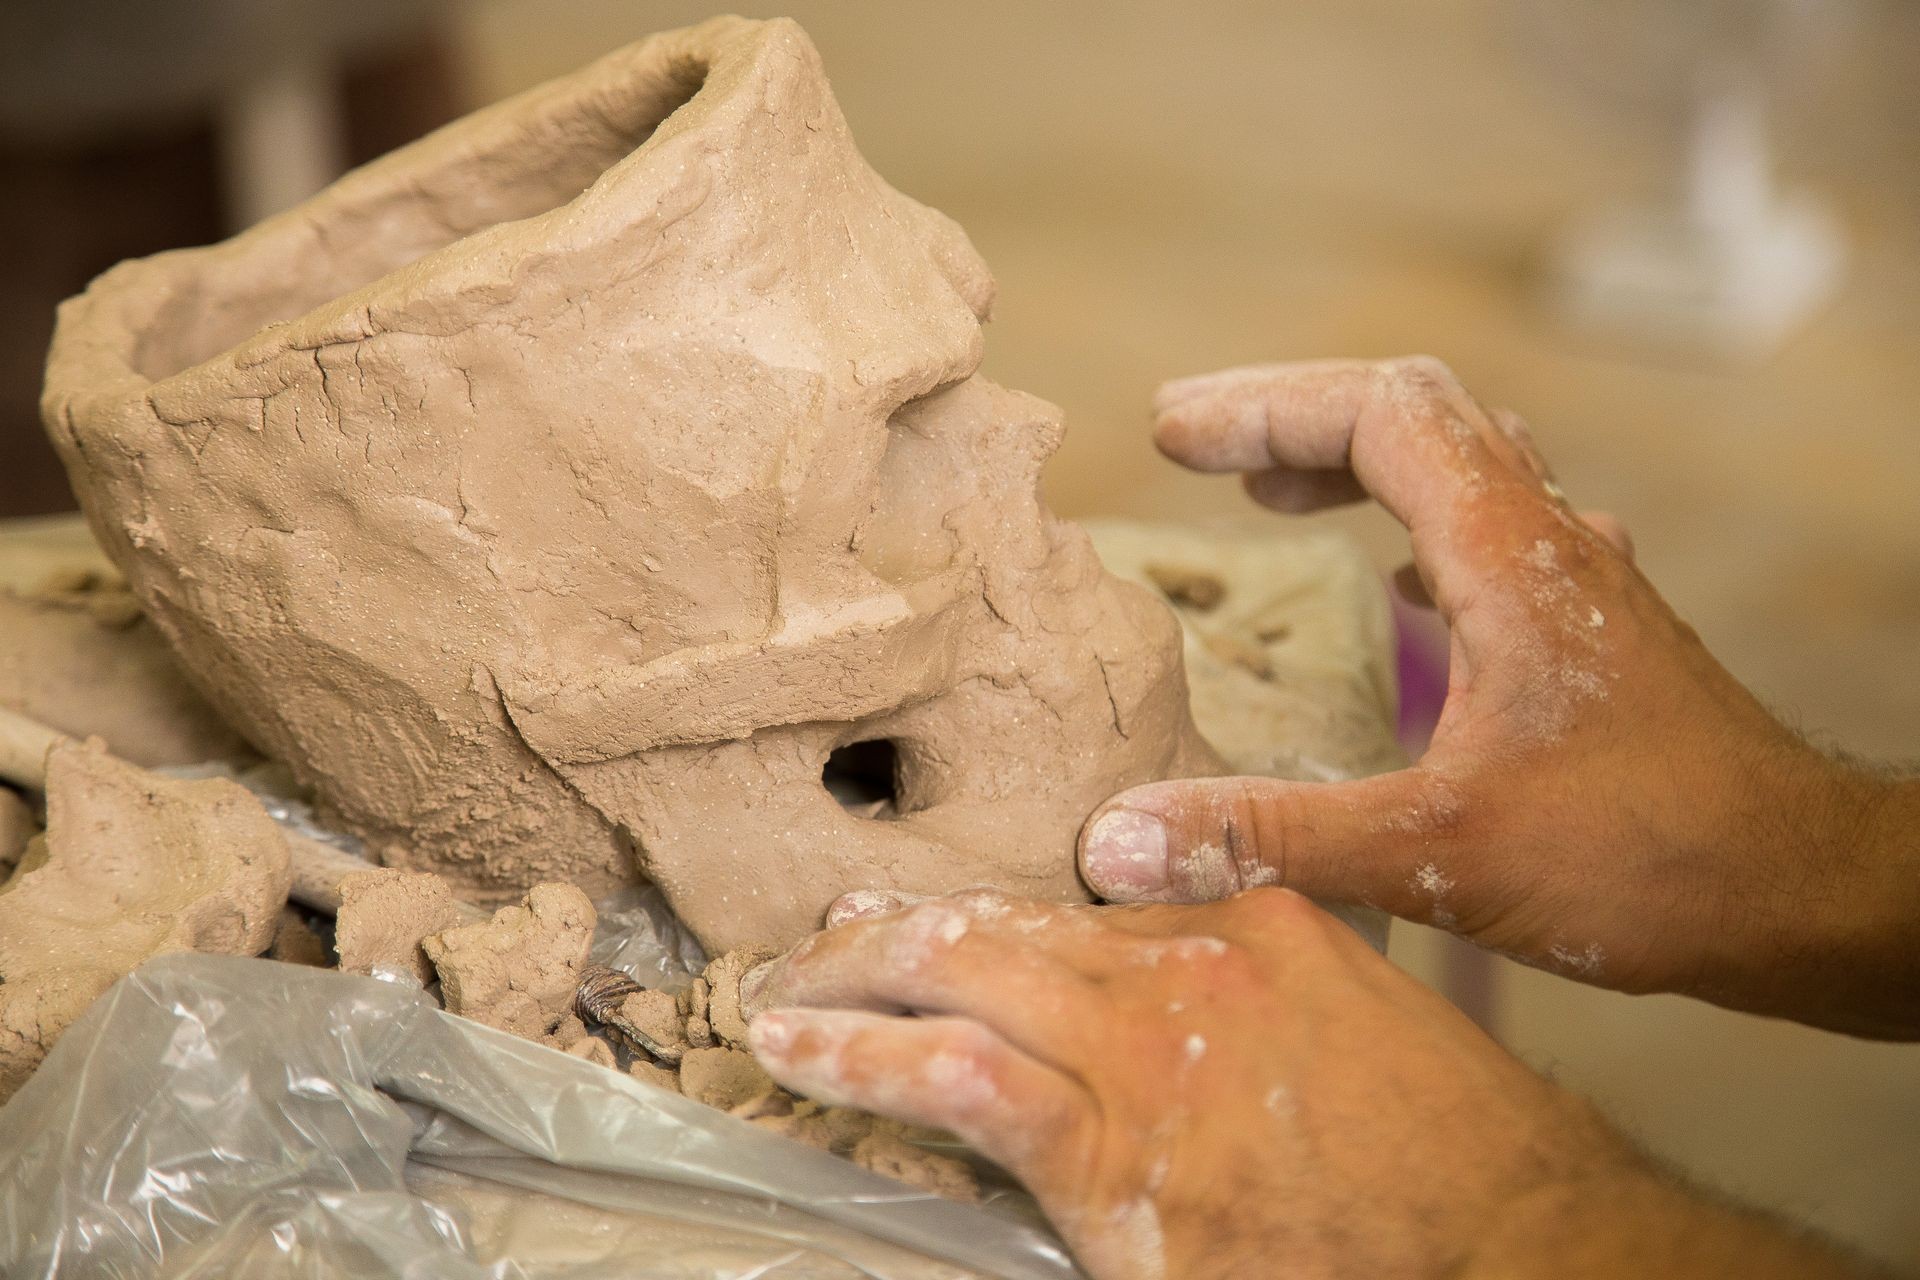 Sculptor modeling a skull out of raw clay with hands in a sculpting studio workshop